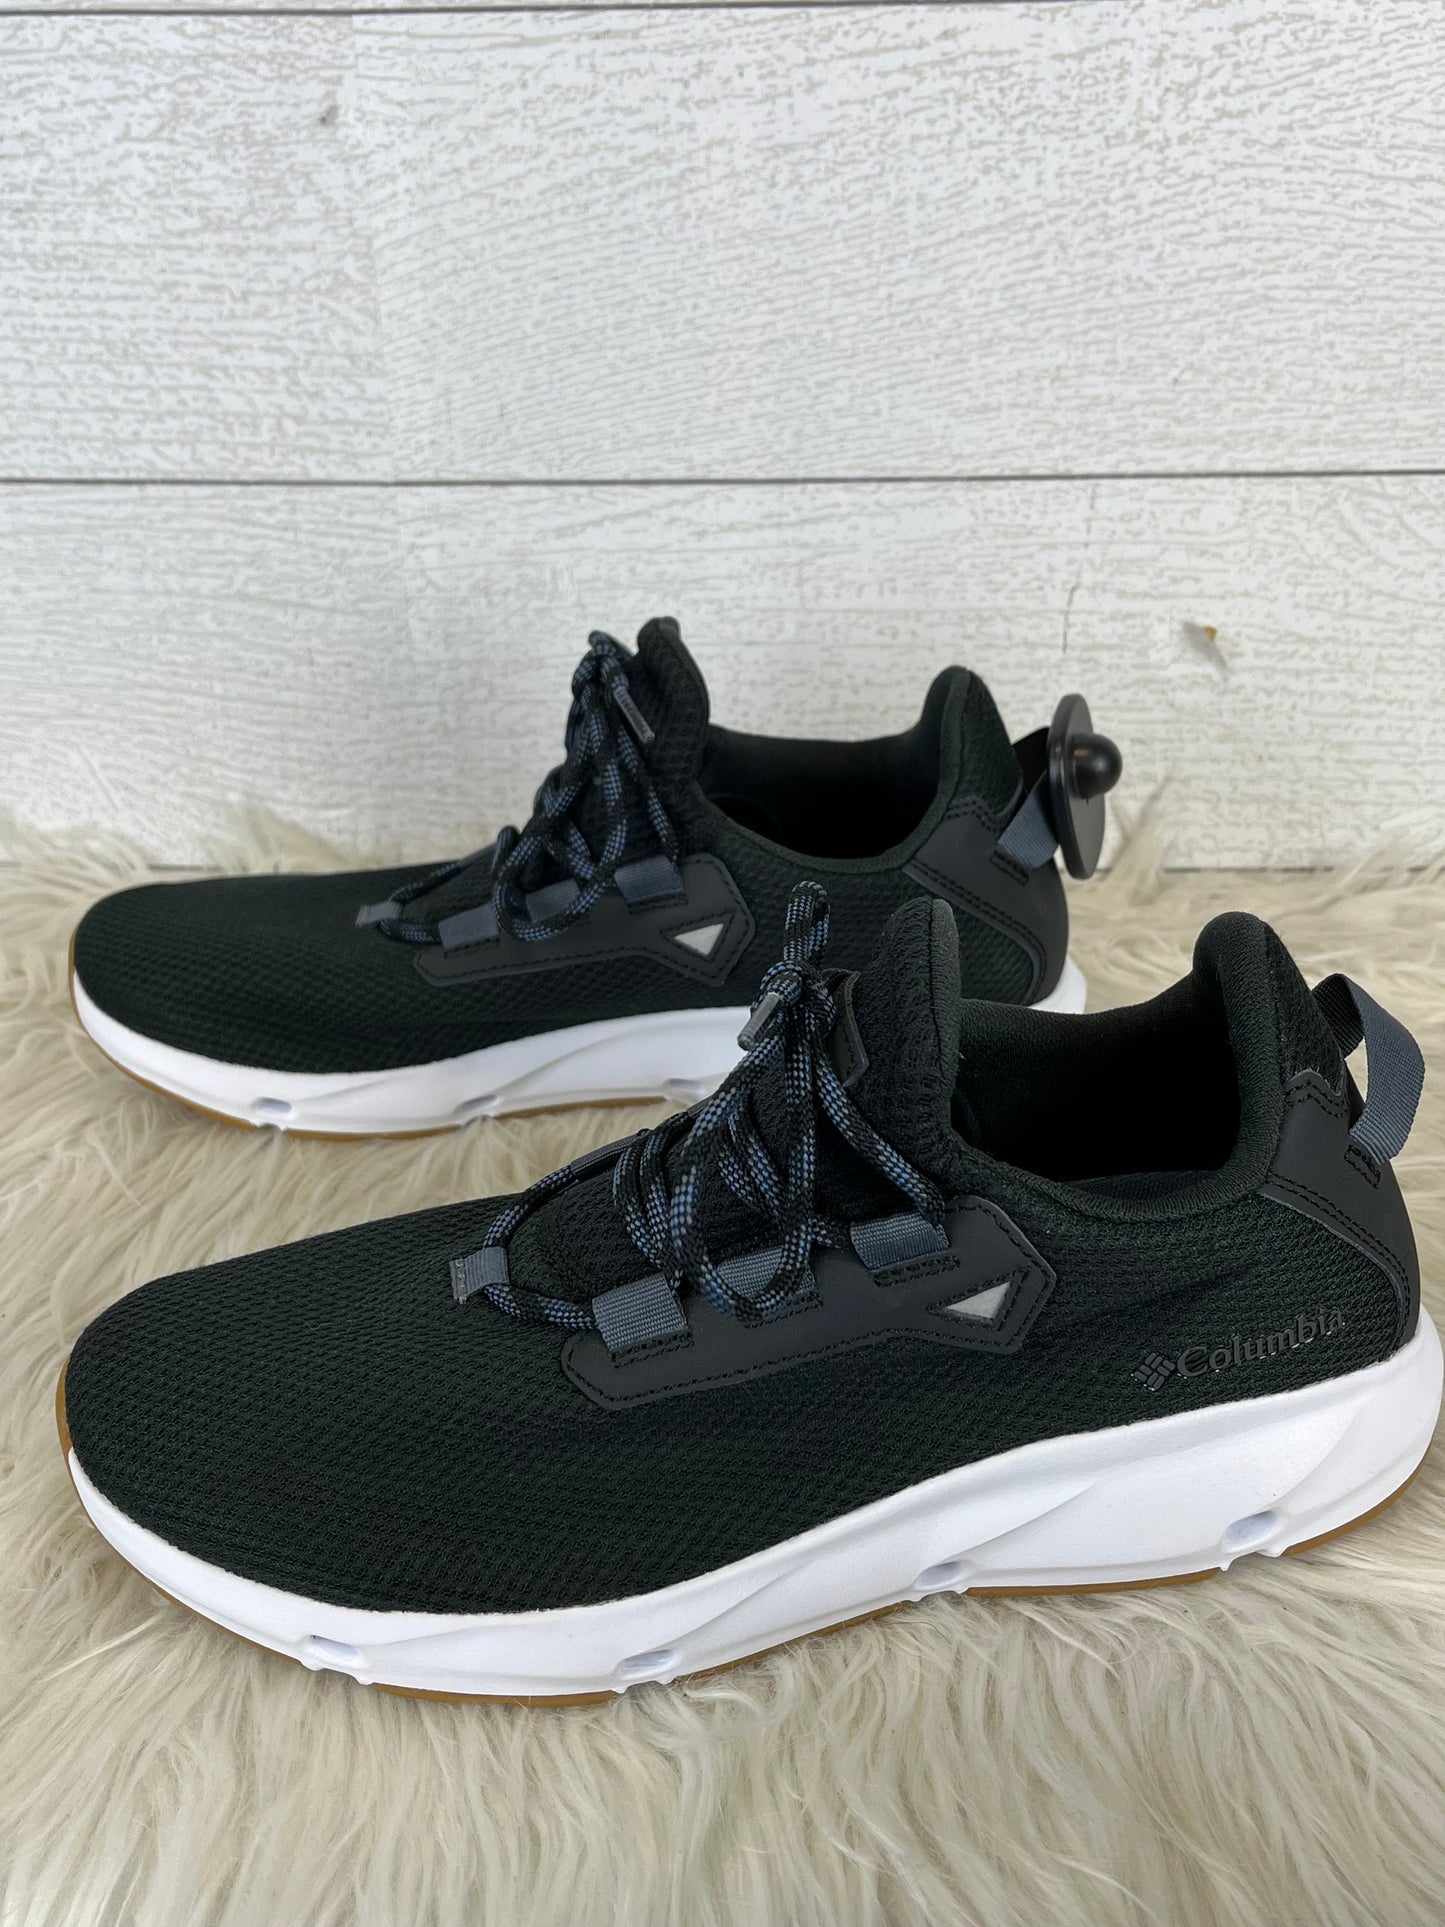 Shoes Athletic By Columbia  Size: 9.5